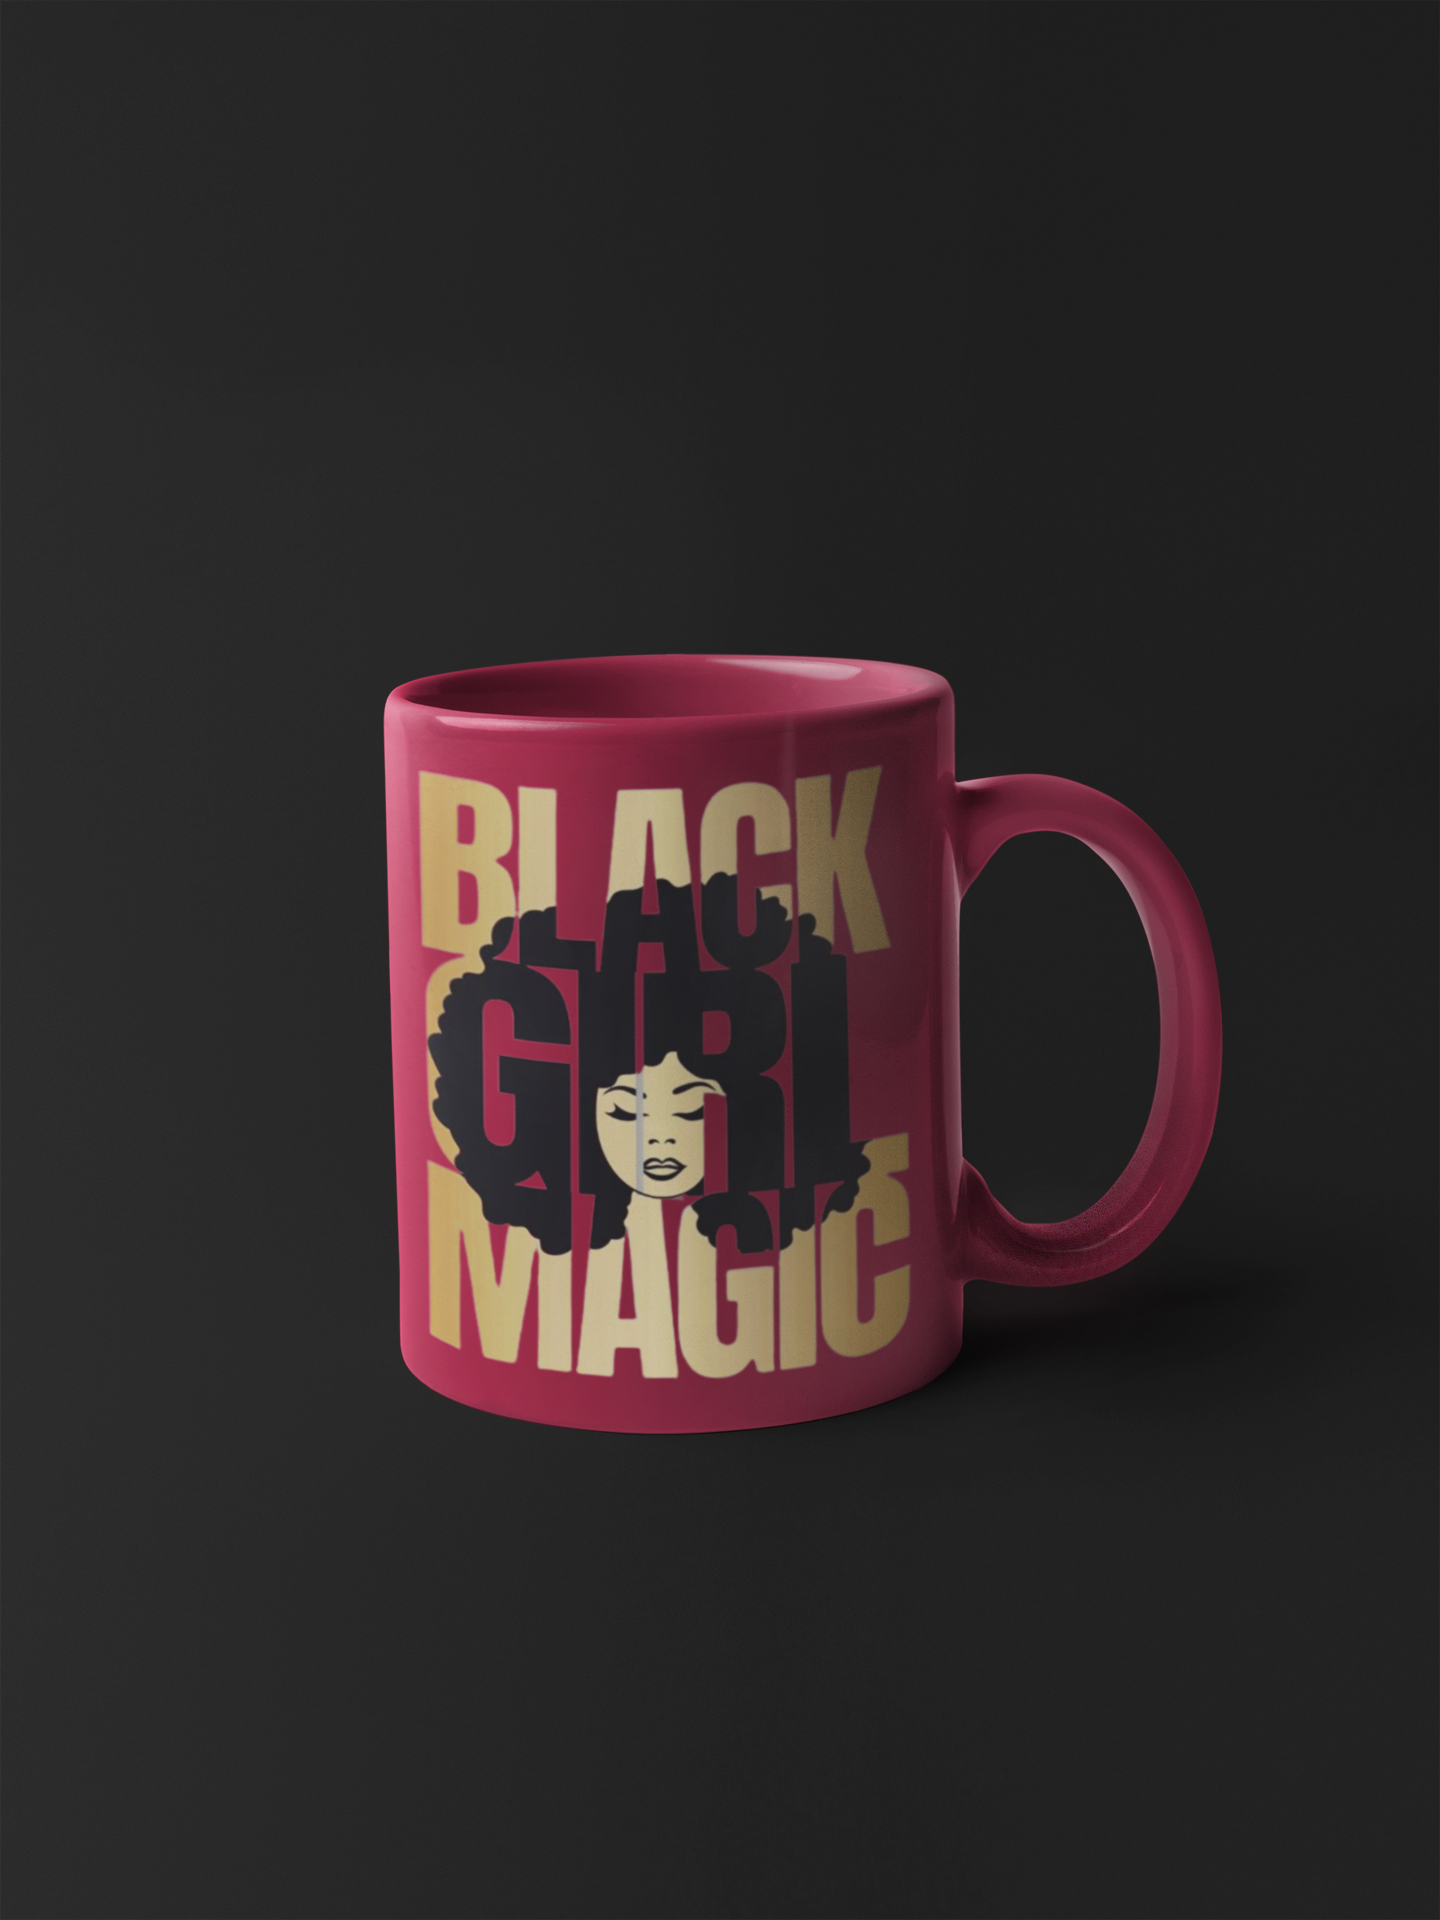 Red mug with Gold Letter Black Girl Magic with silhouette of Black Girl with AFro